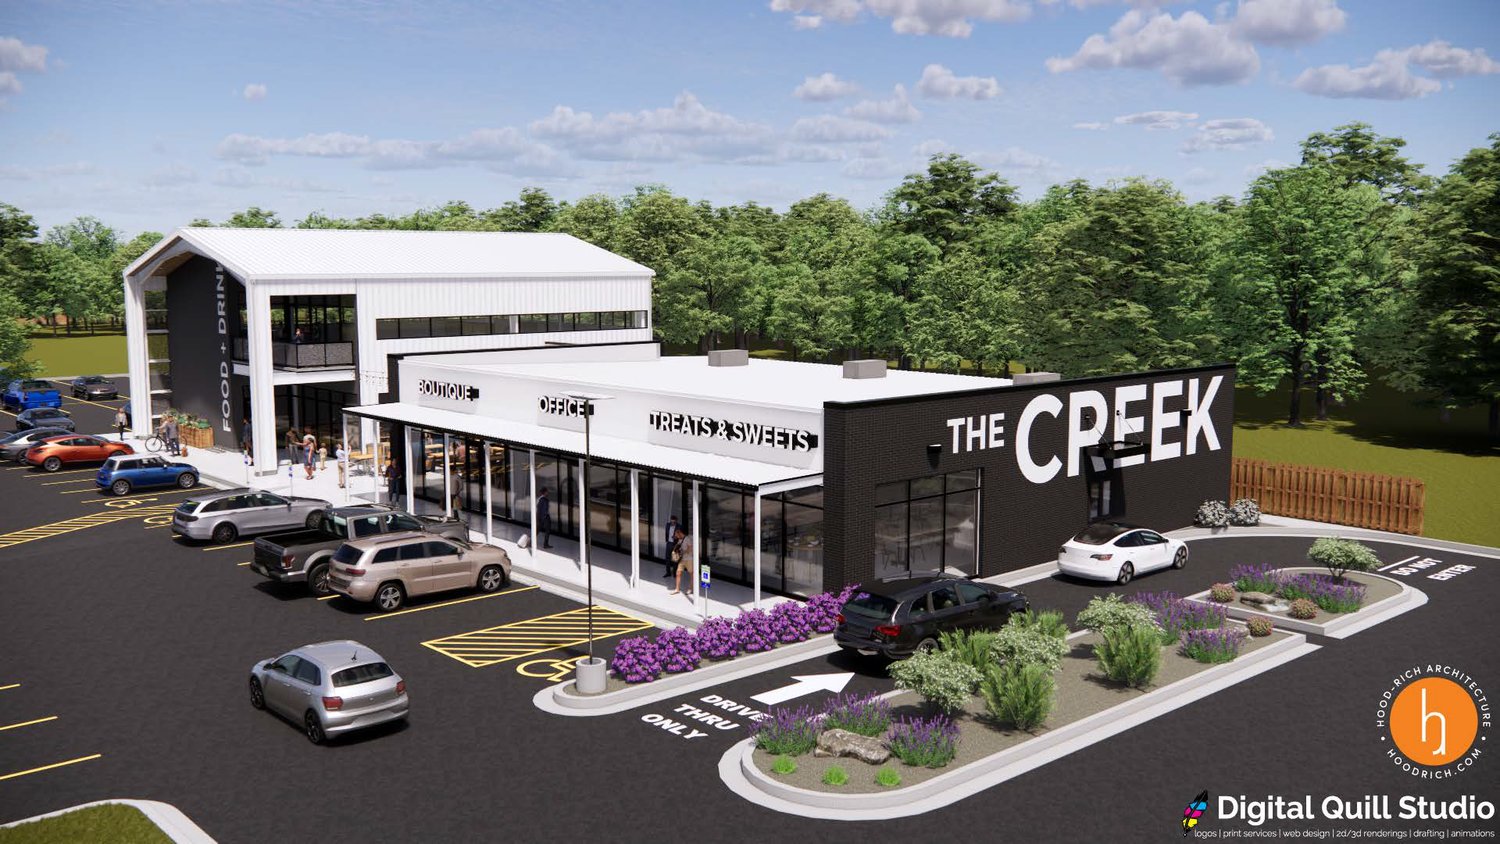 The Creek is designed with 9,500 square feet of commercial space.